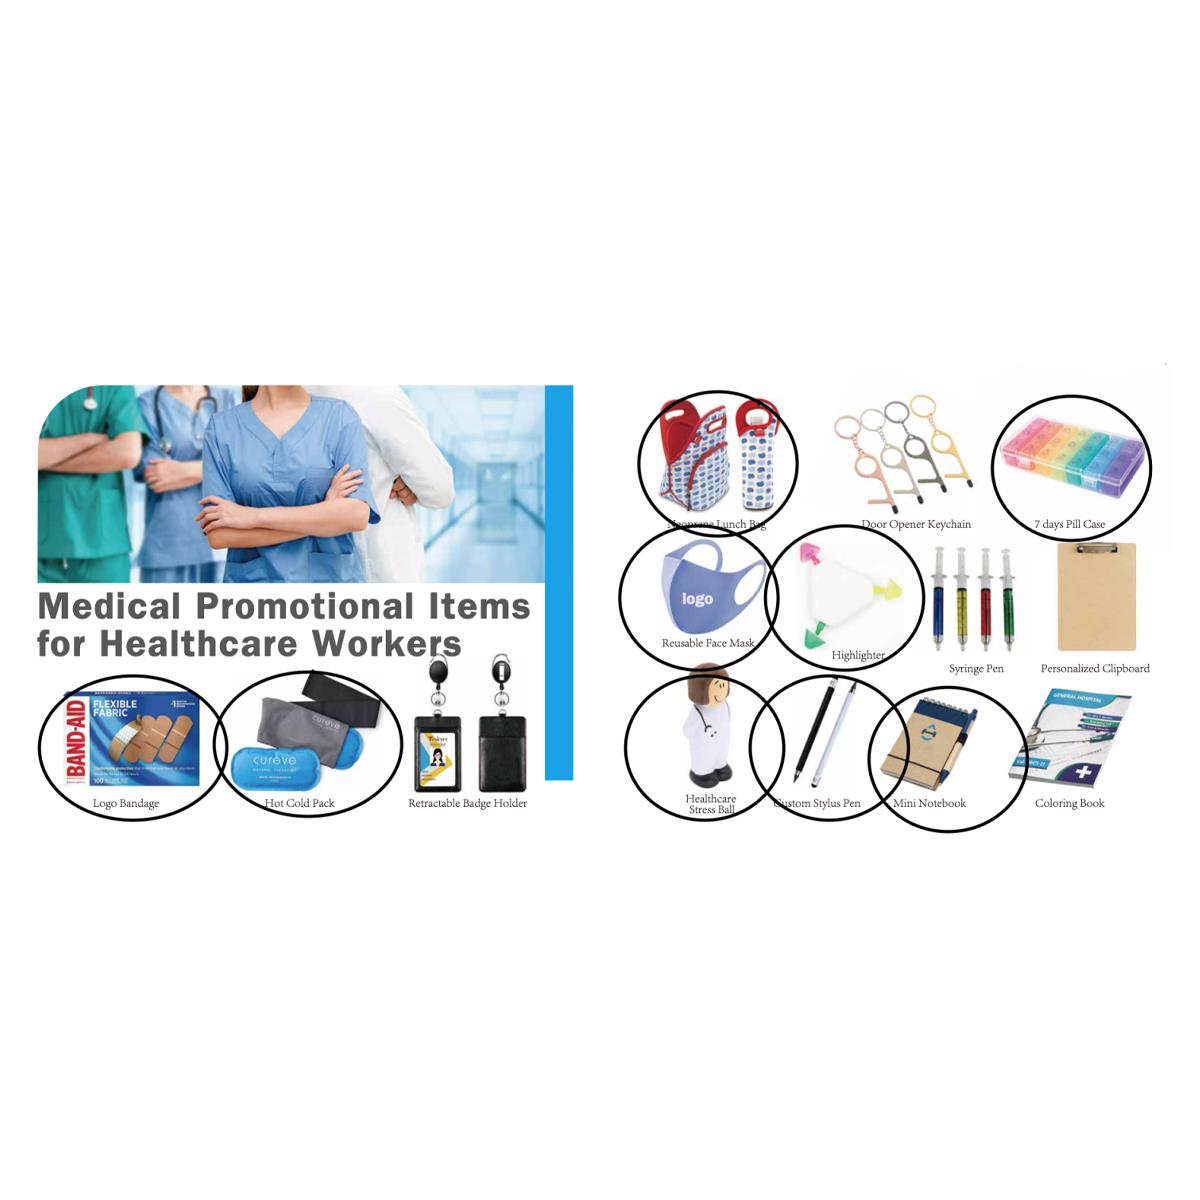 Medical Promotional Items for Healthcare Workers